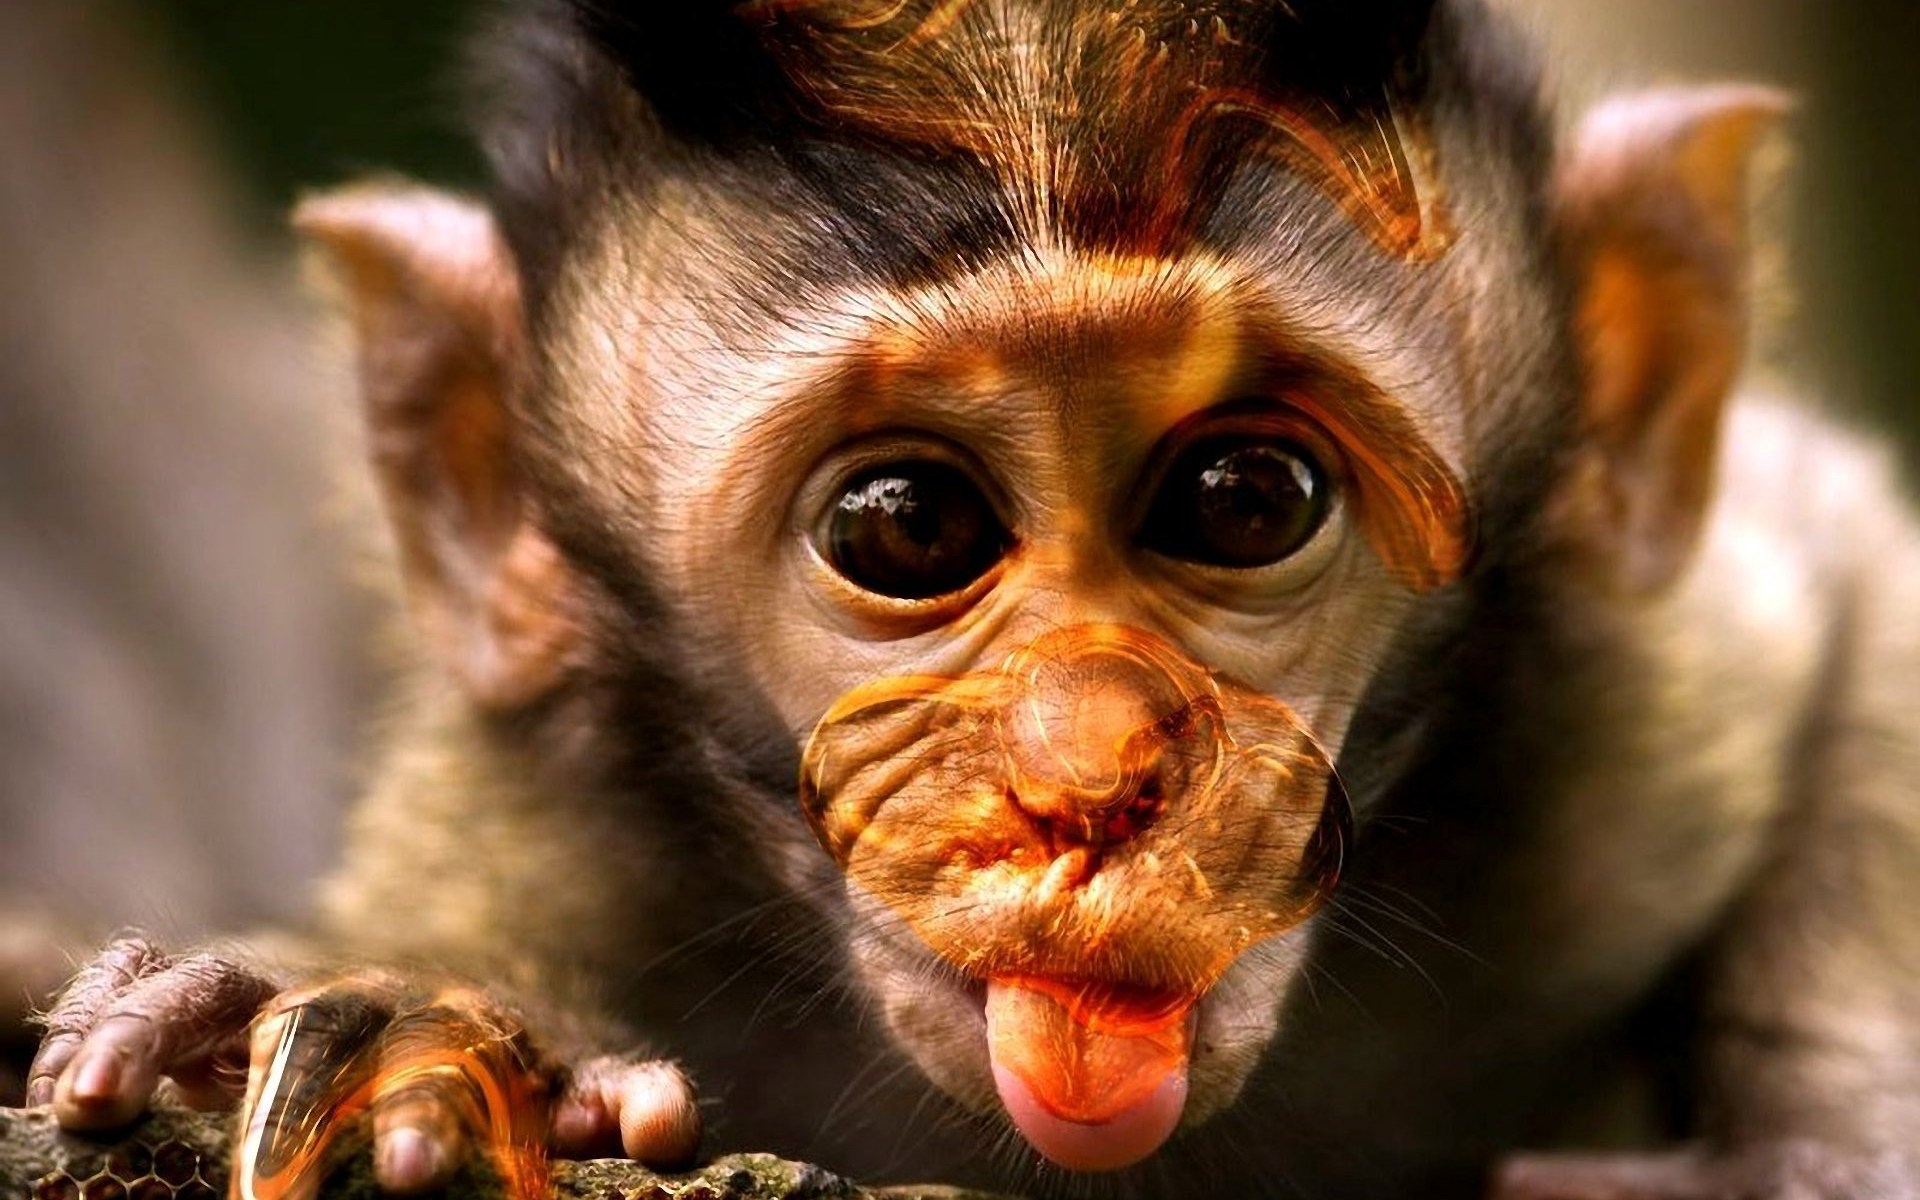 Monkey Wallpaper Pictures